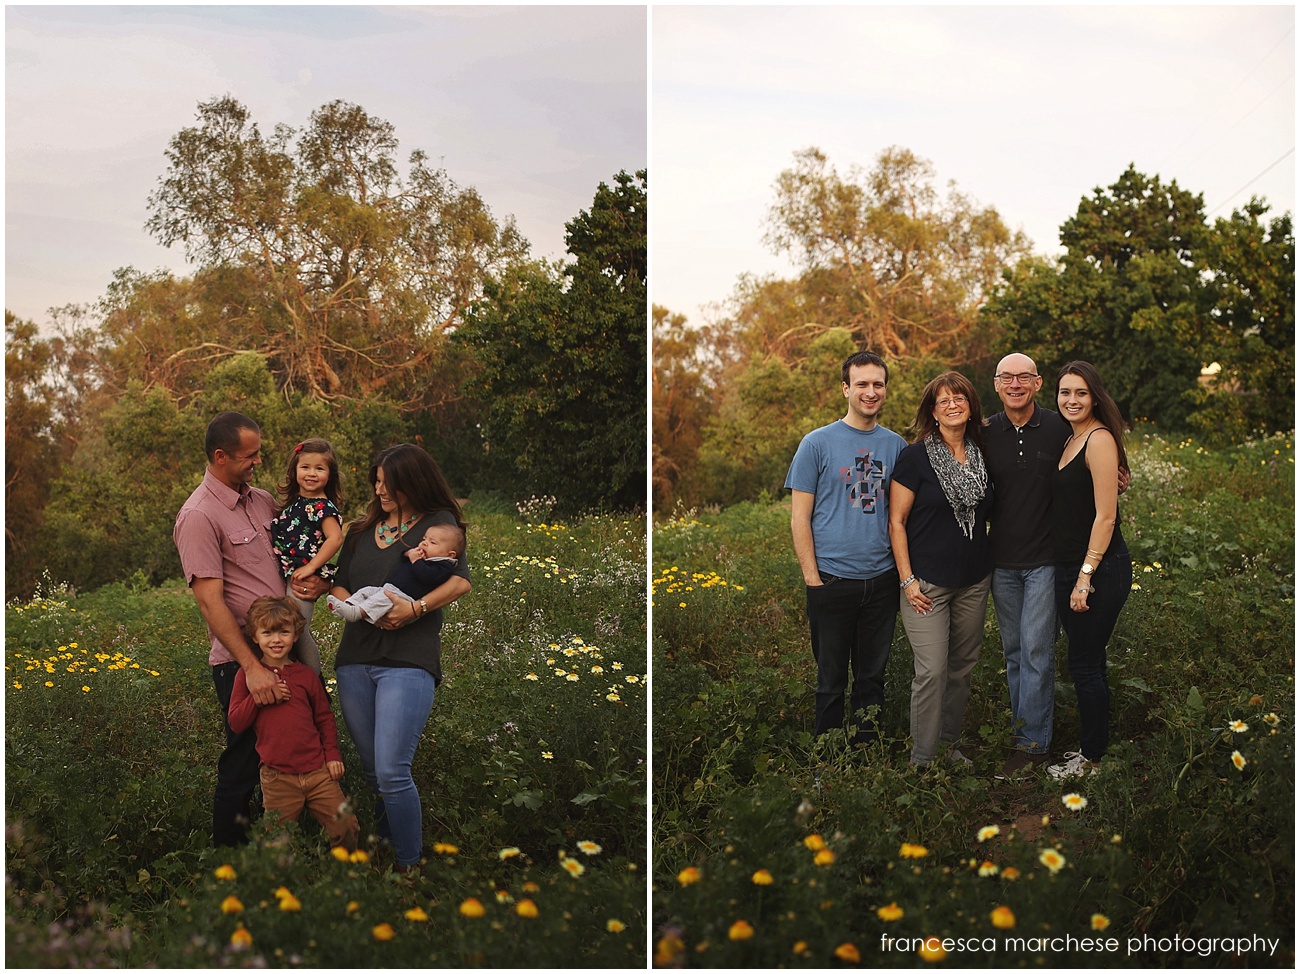 Extended family photography session - Francesca Marchese Photography